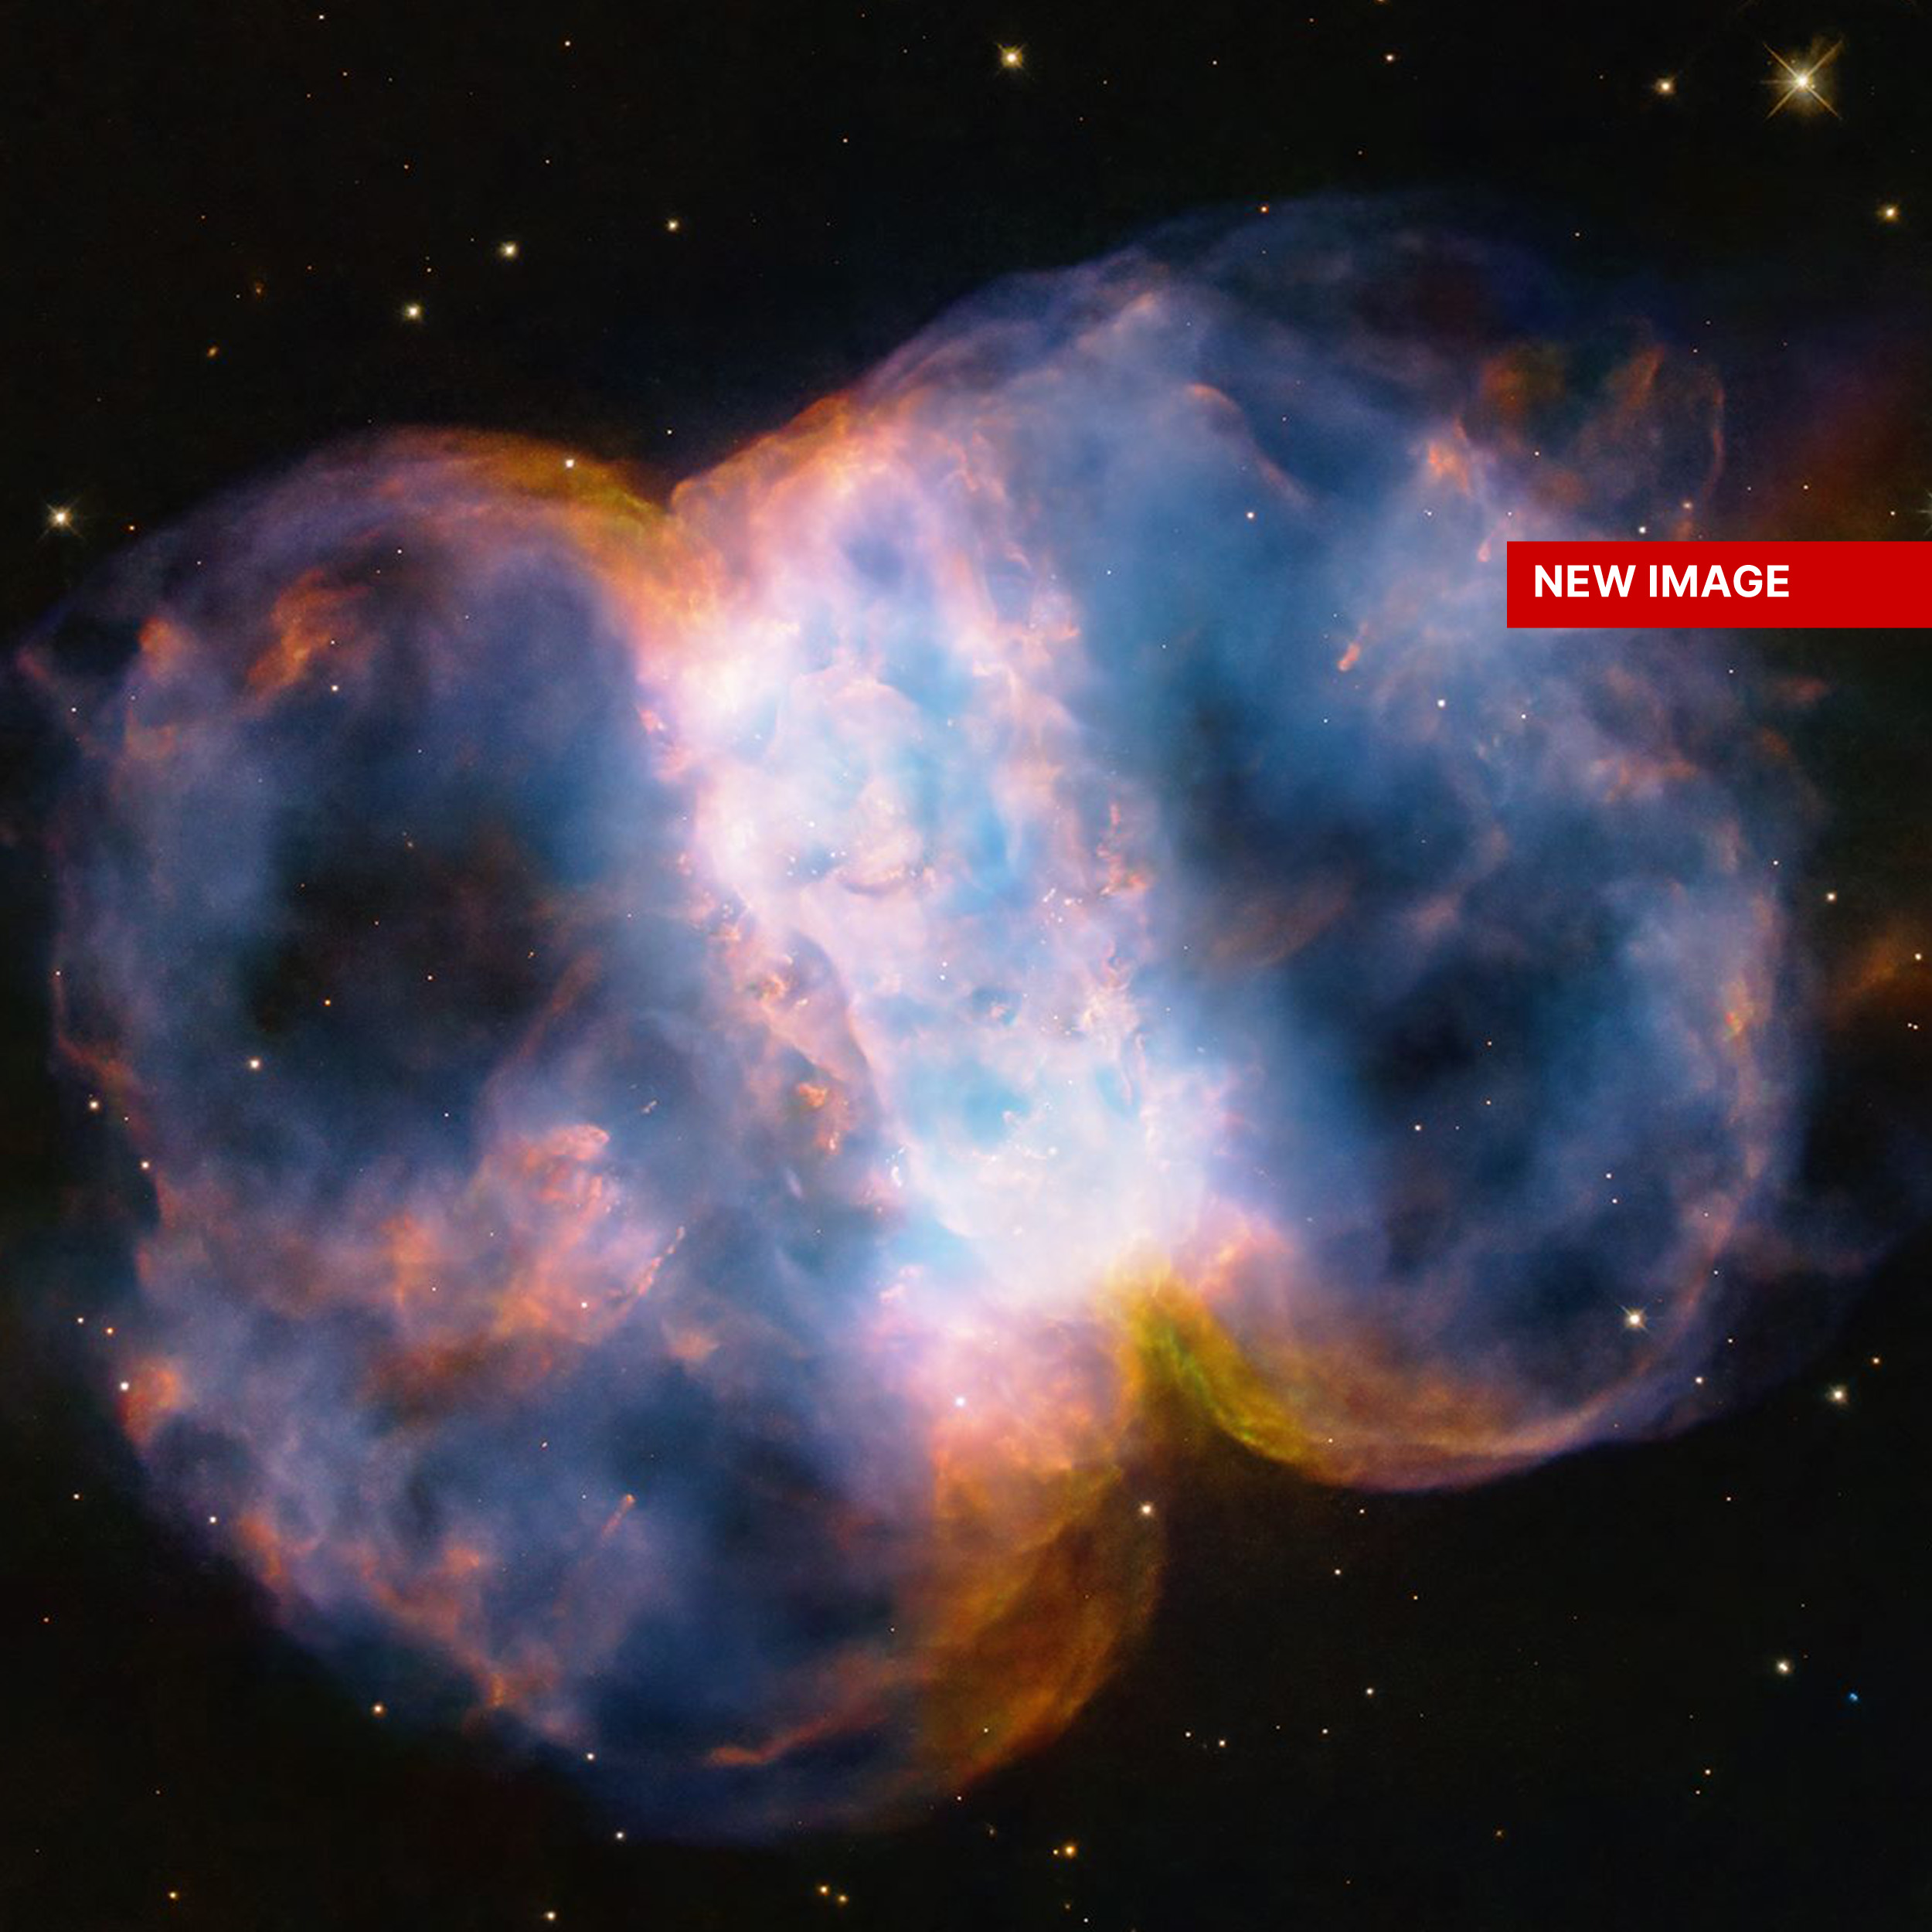 Taking up most of the image, is a multi-colored nebula appearing as two translucent orbs attached by a white band.